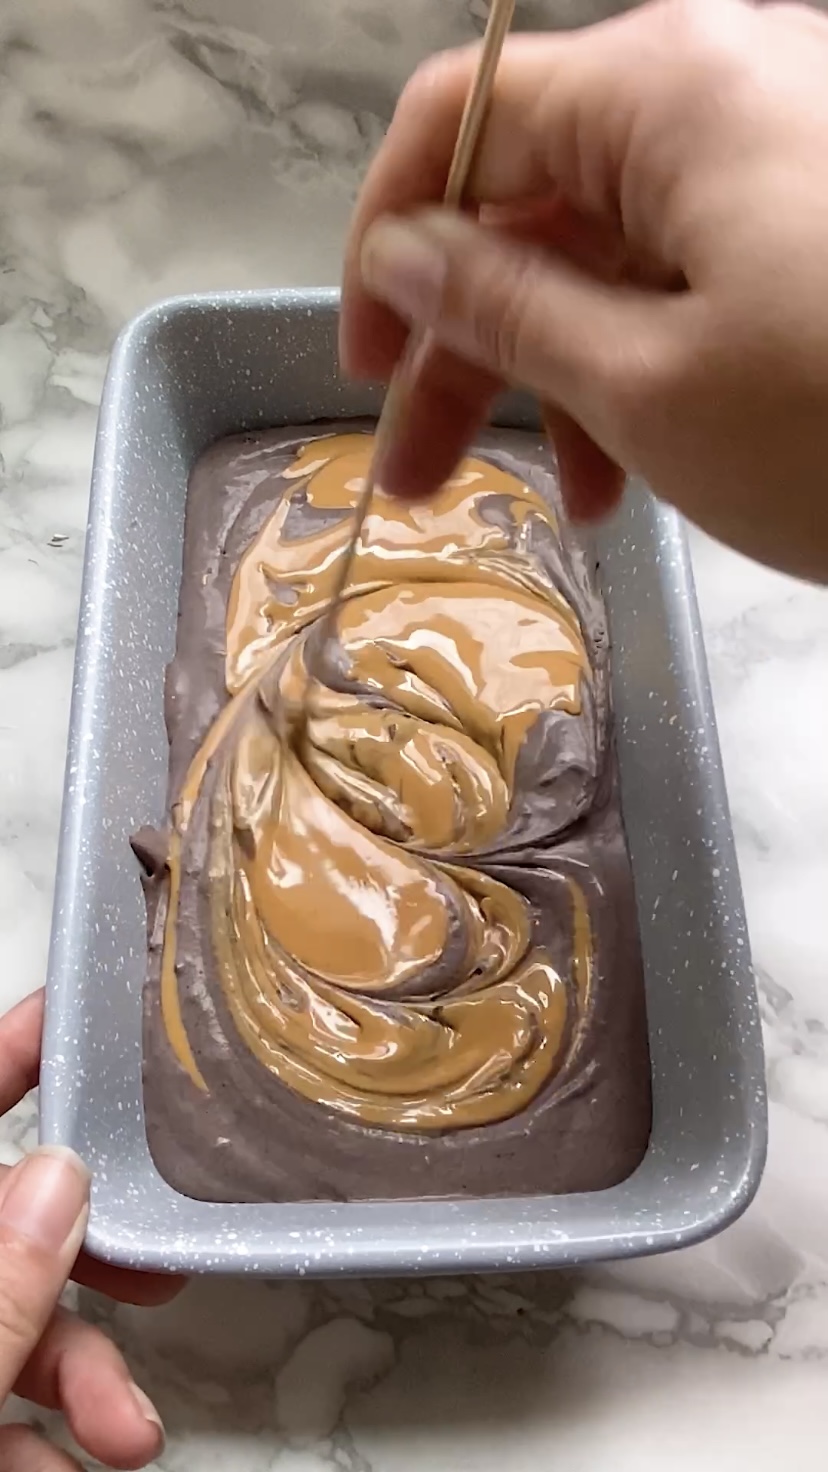 Swirling peanut butter into chocolate ice cream in a loaf pan.